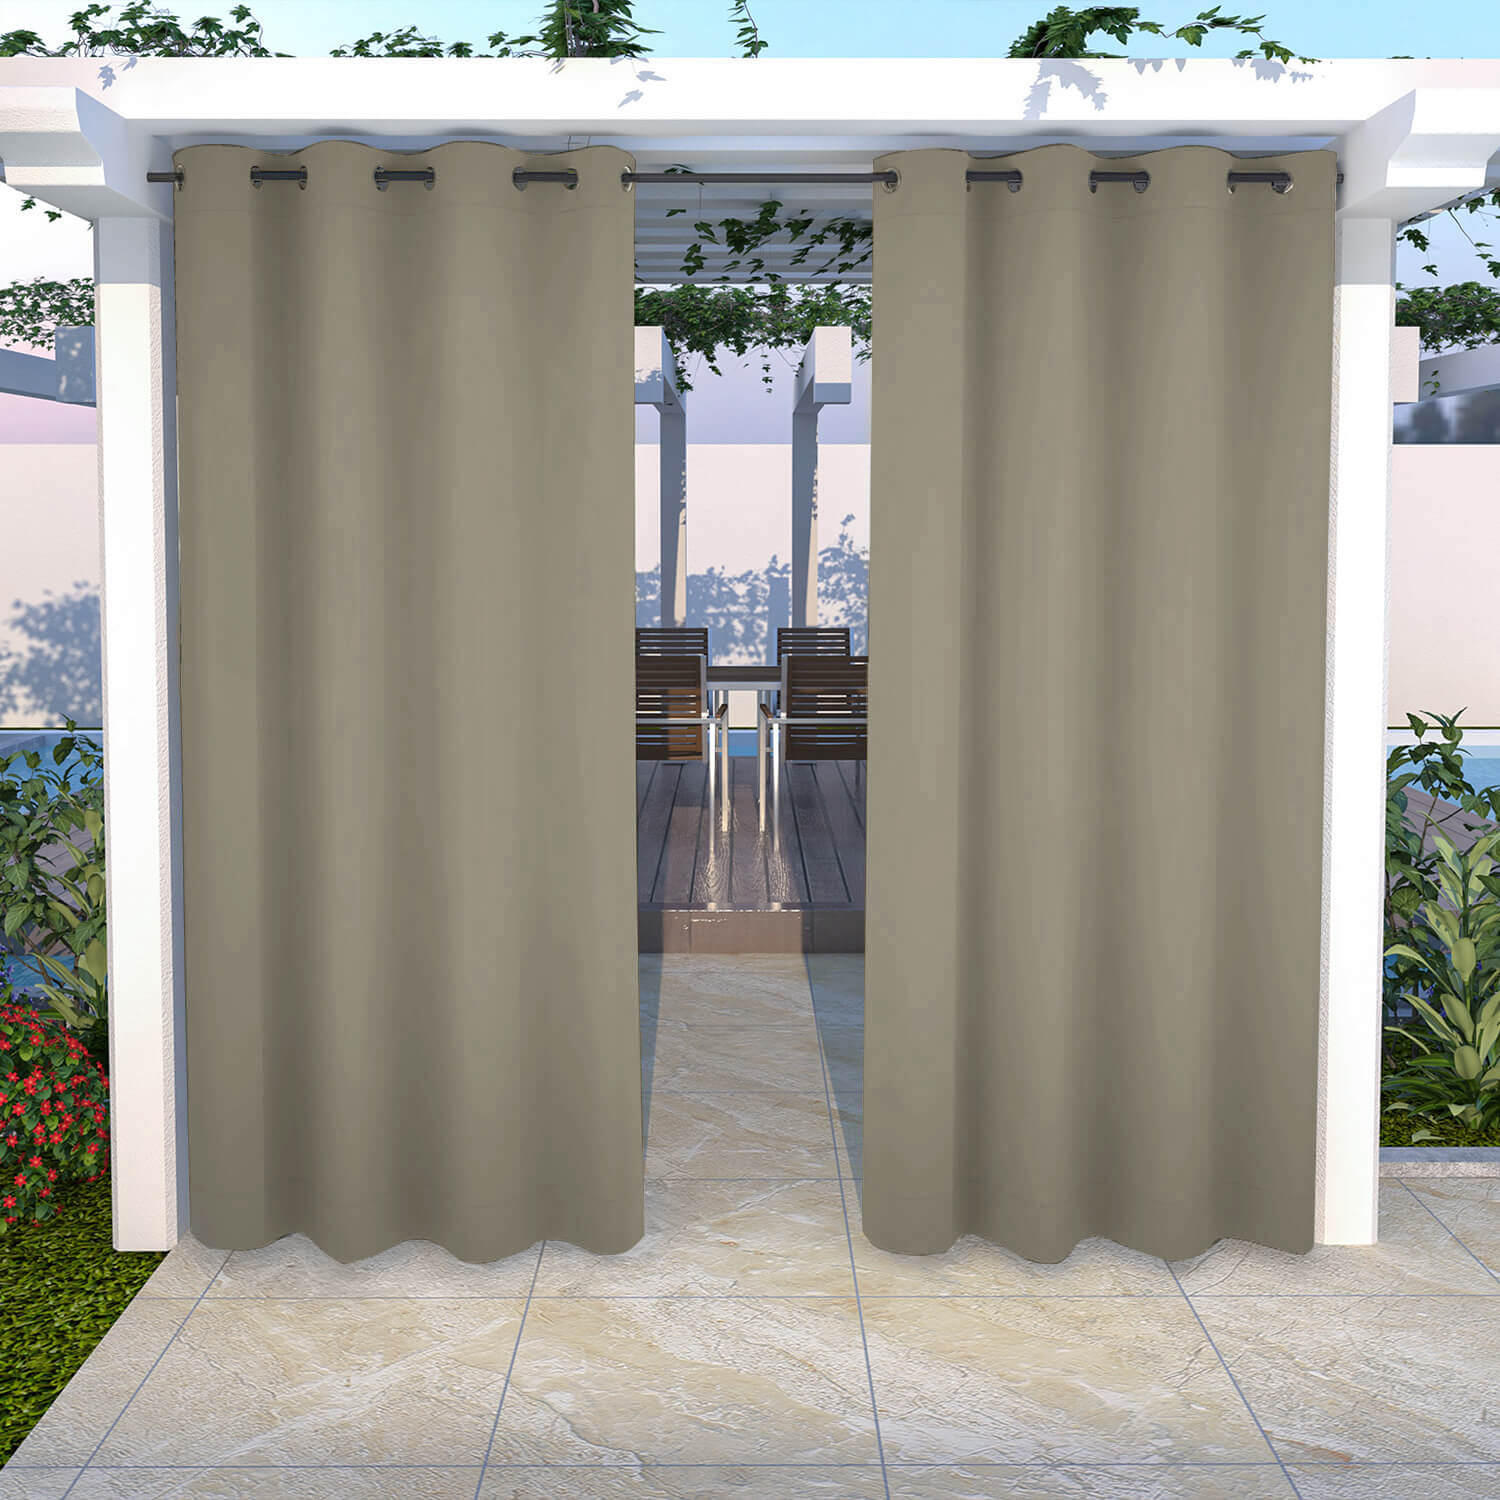 Snowcity Outdoor Curtains Waterproof Grommet Top 1 Panel - Taupe